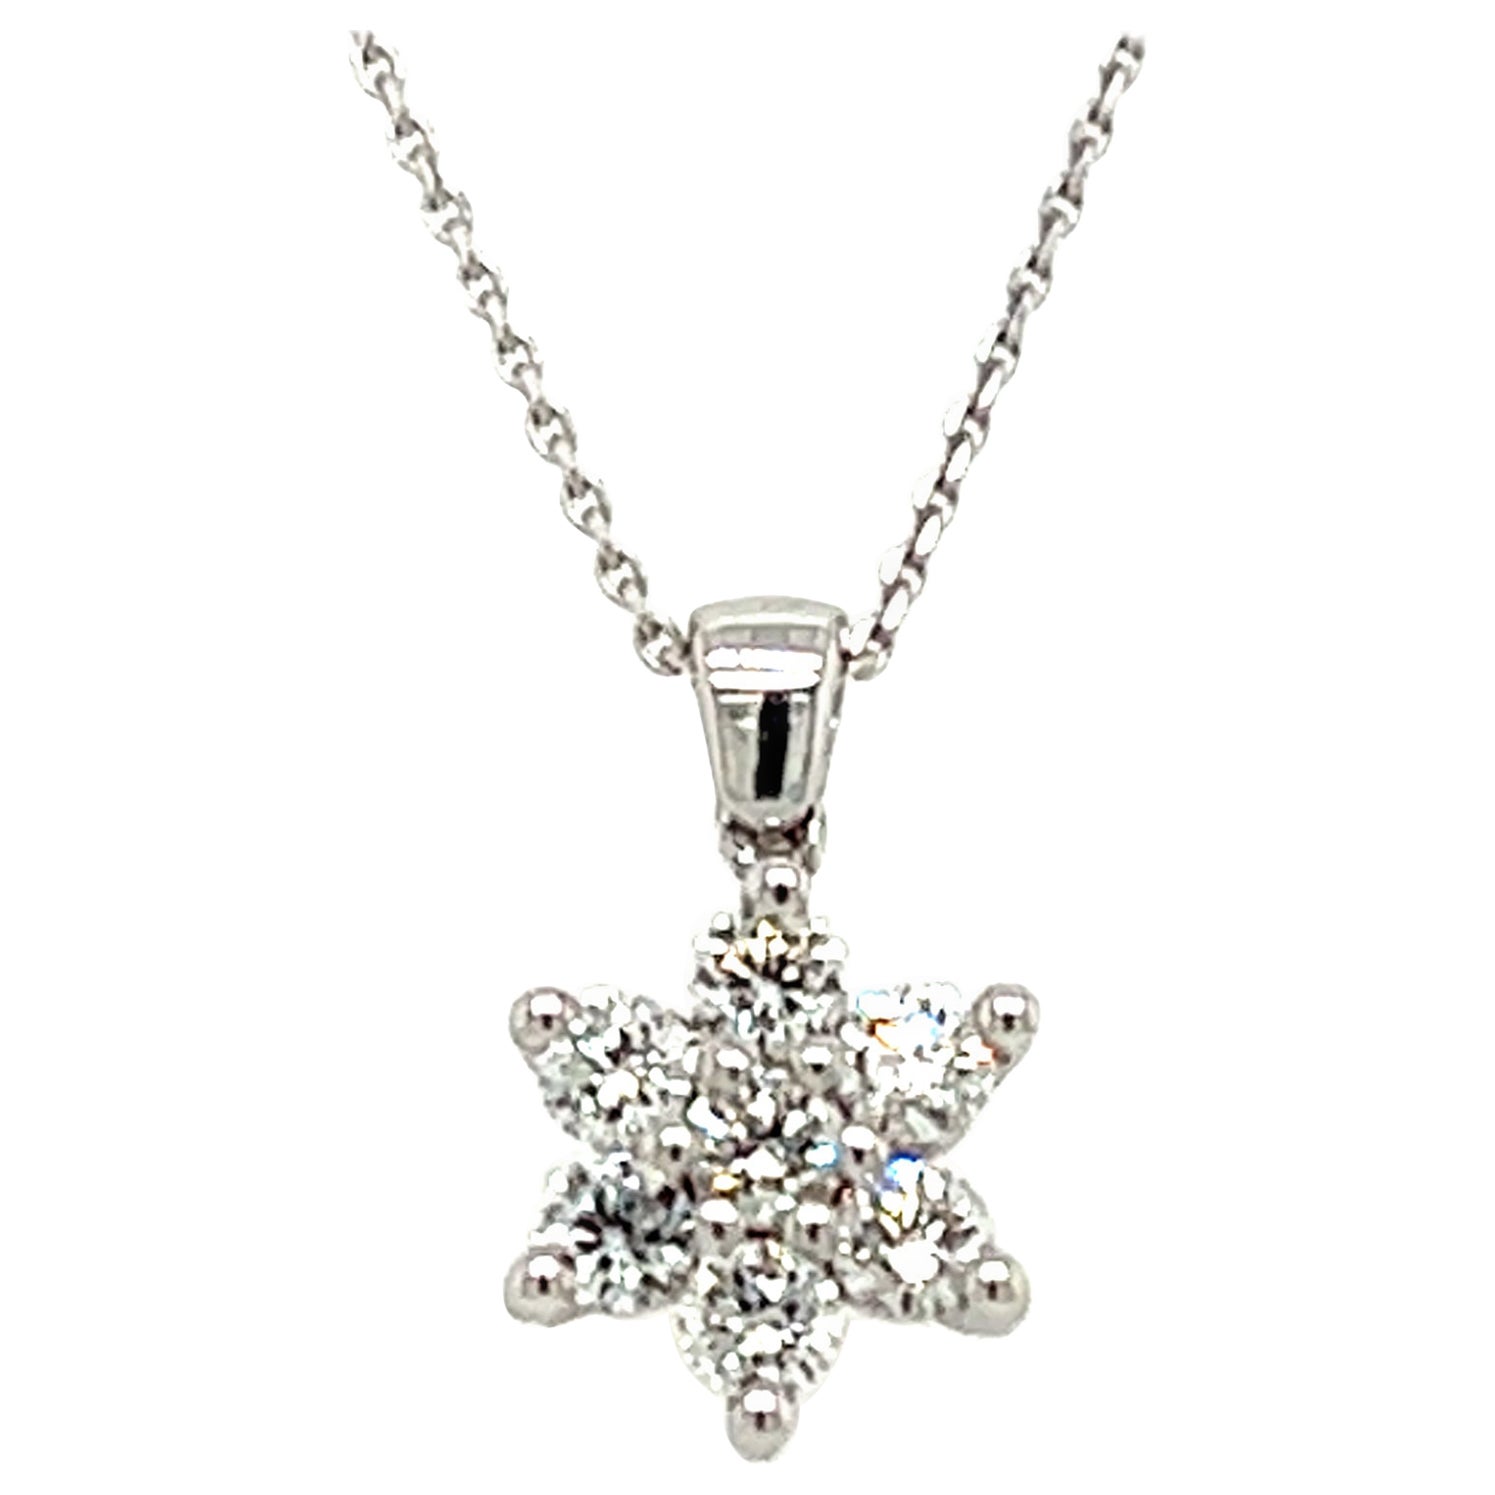 Flower Shaped Diamond Necklace 0.31 Cts Mounted on 18Kt White Gold